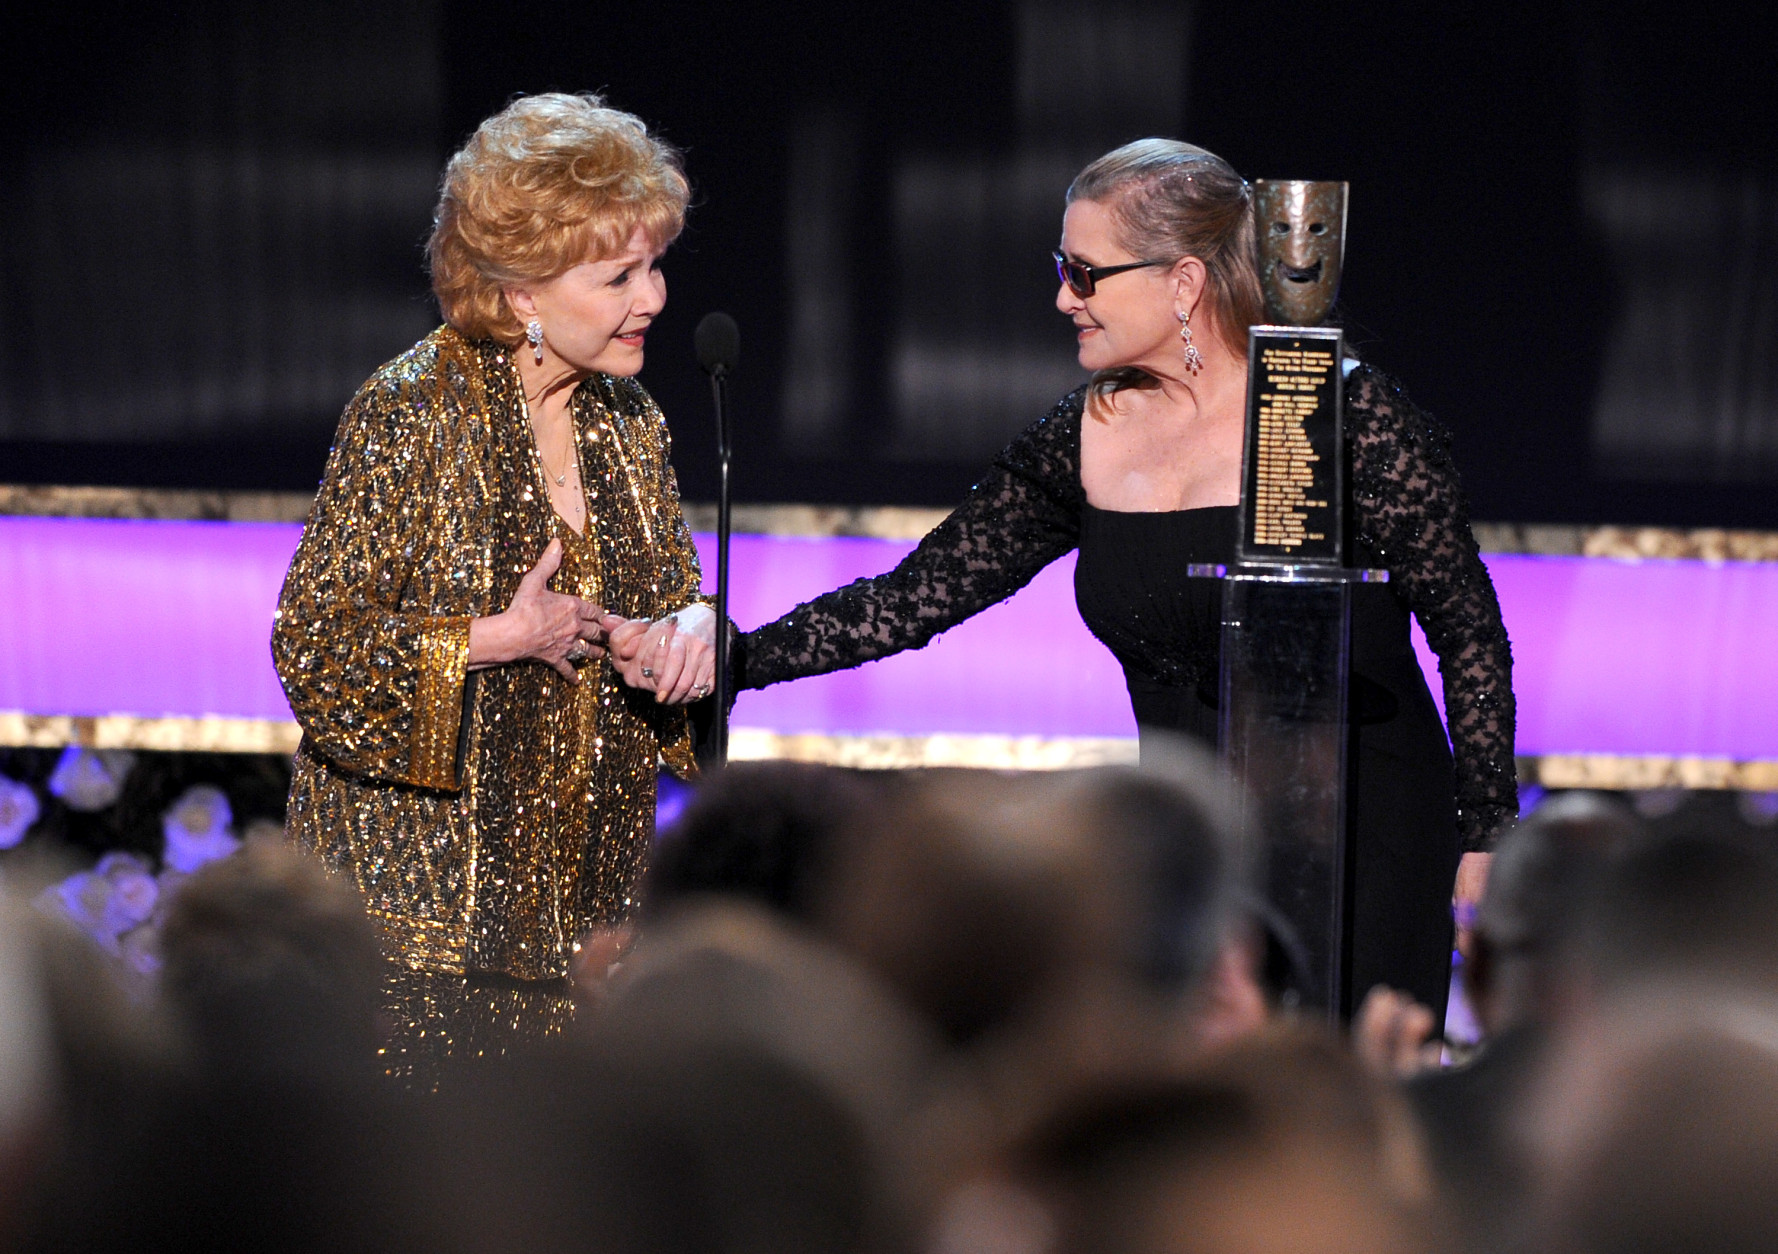 Carrie Fisher, right, presents Debbie Reynolds with the Screen Actors Guild life achievement award at the 21st annual Screen Actors Guild Awards at the Shrine Auditorium on Sunday, Jan. 25, 2015, in Los Angeles. (Photo by Vince Bucci/Invision/AP)